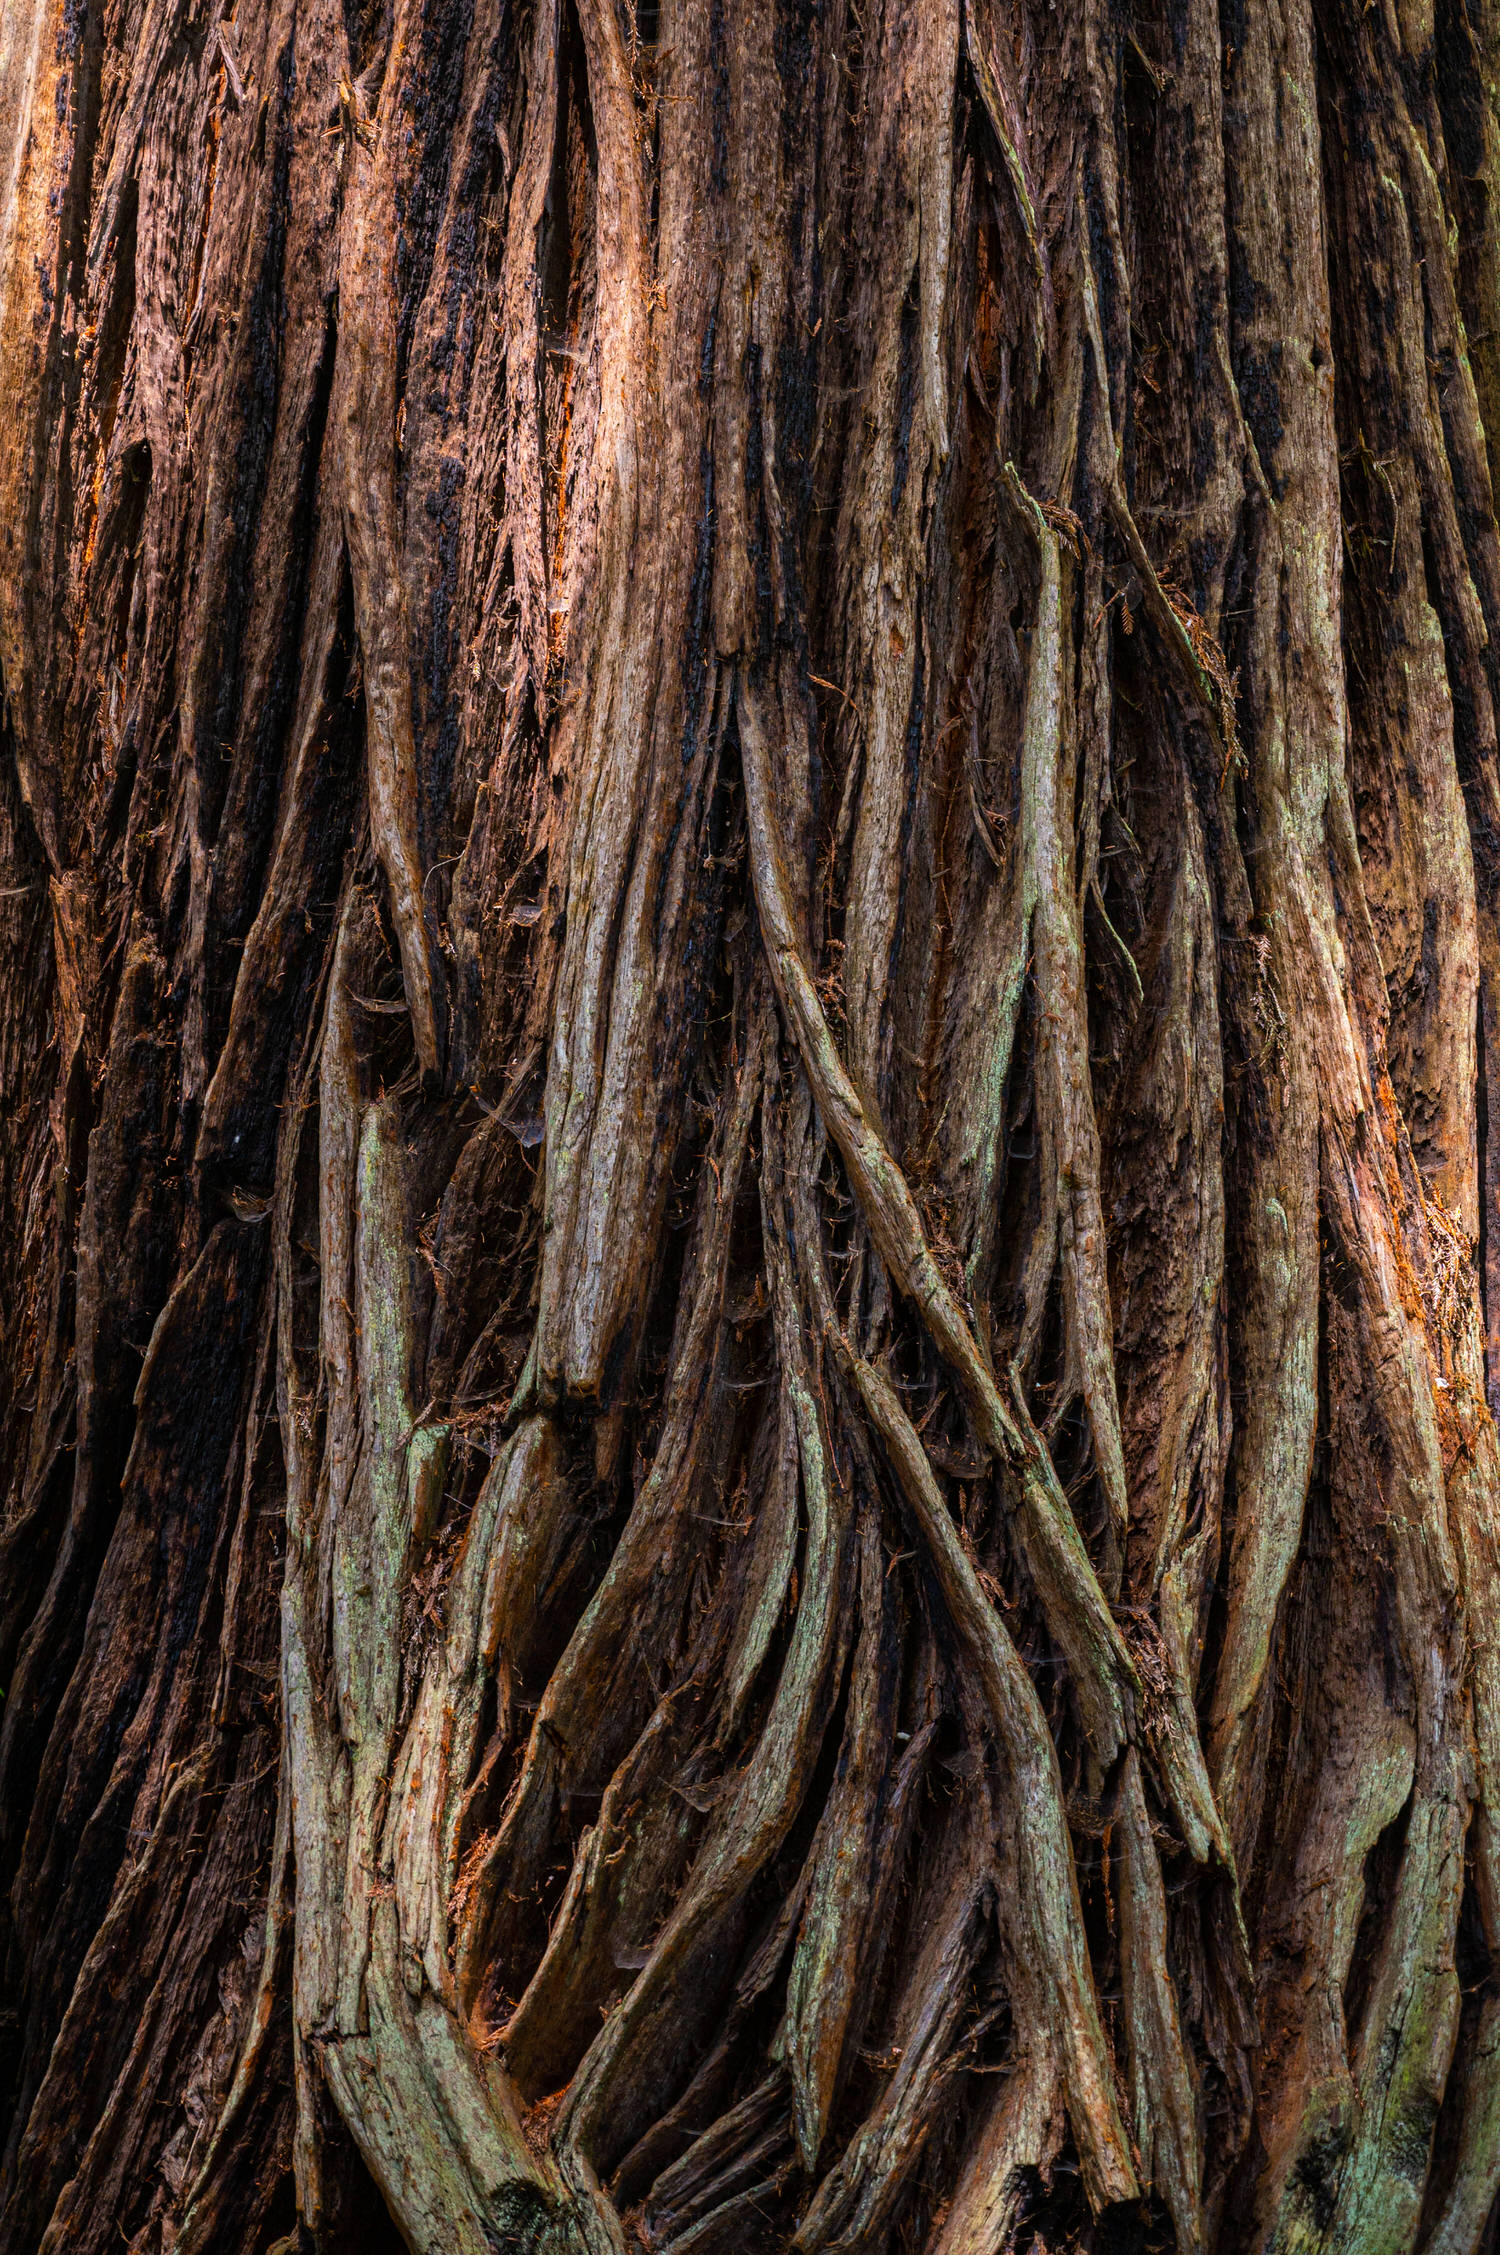 Texture of a Great Redwood Tree